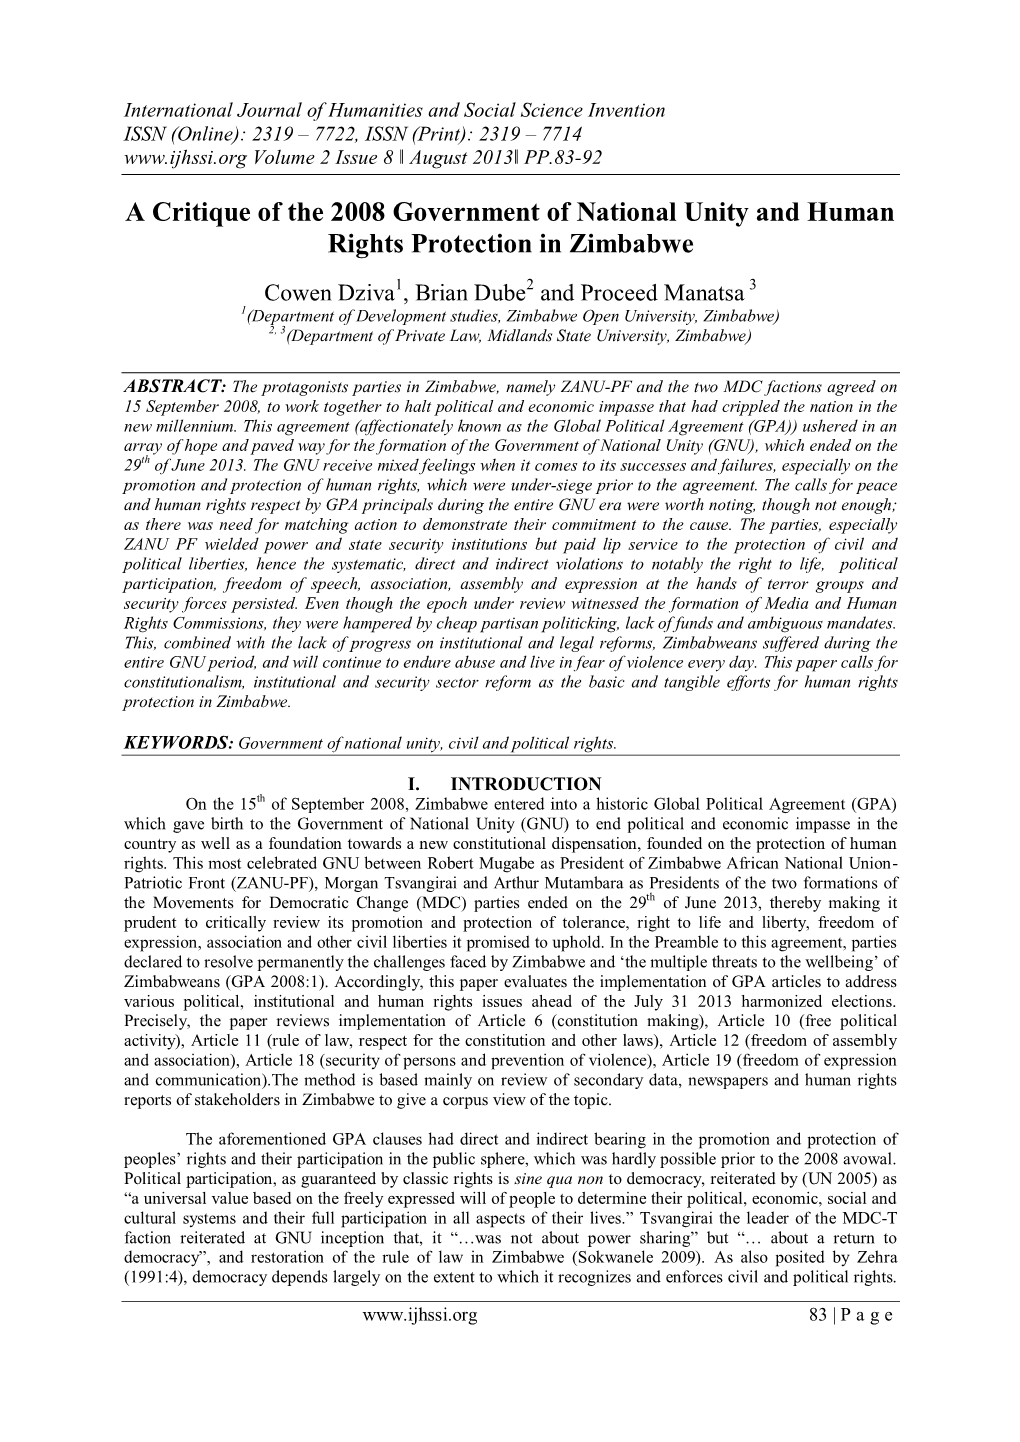 A Critique of the 2008 Government of National Unity and Human Rights Protection in Zimbabwe